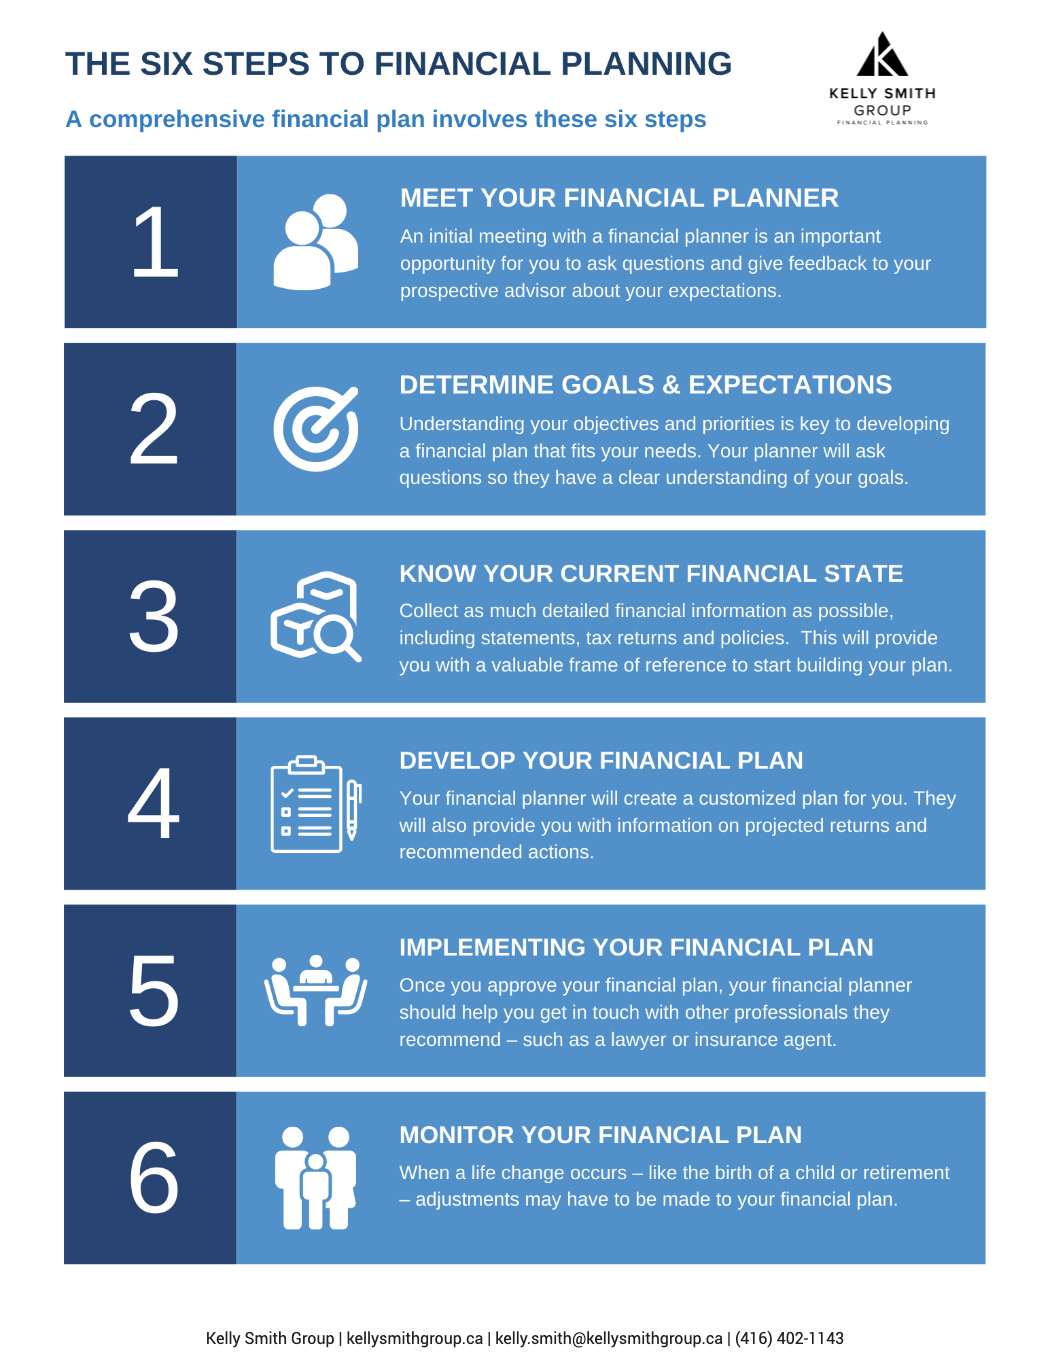 How a Financial Planner Can Help You